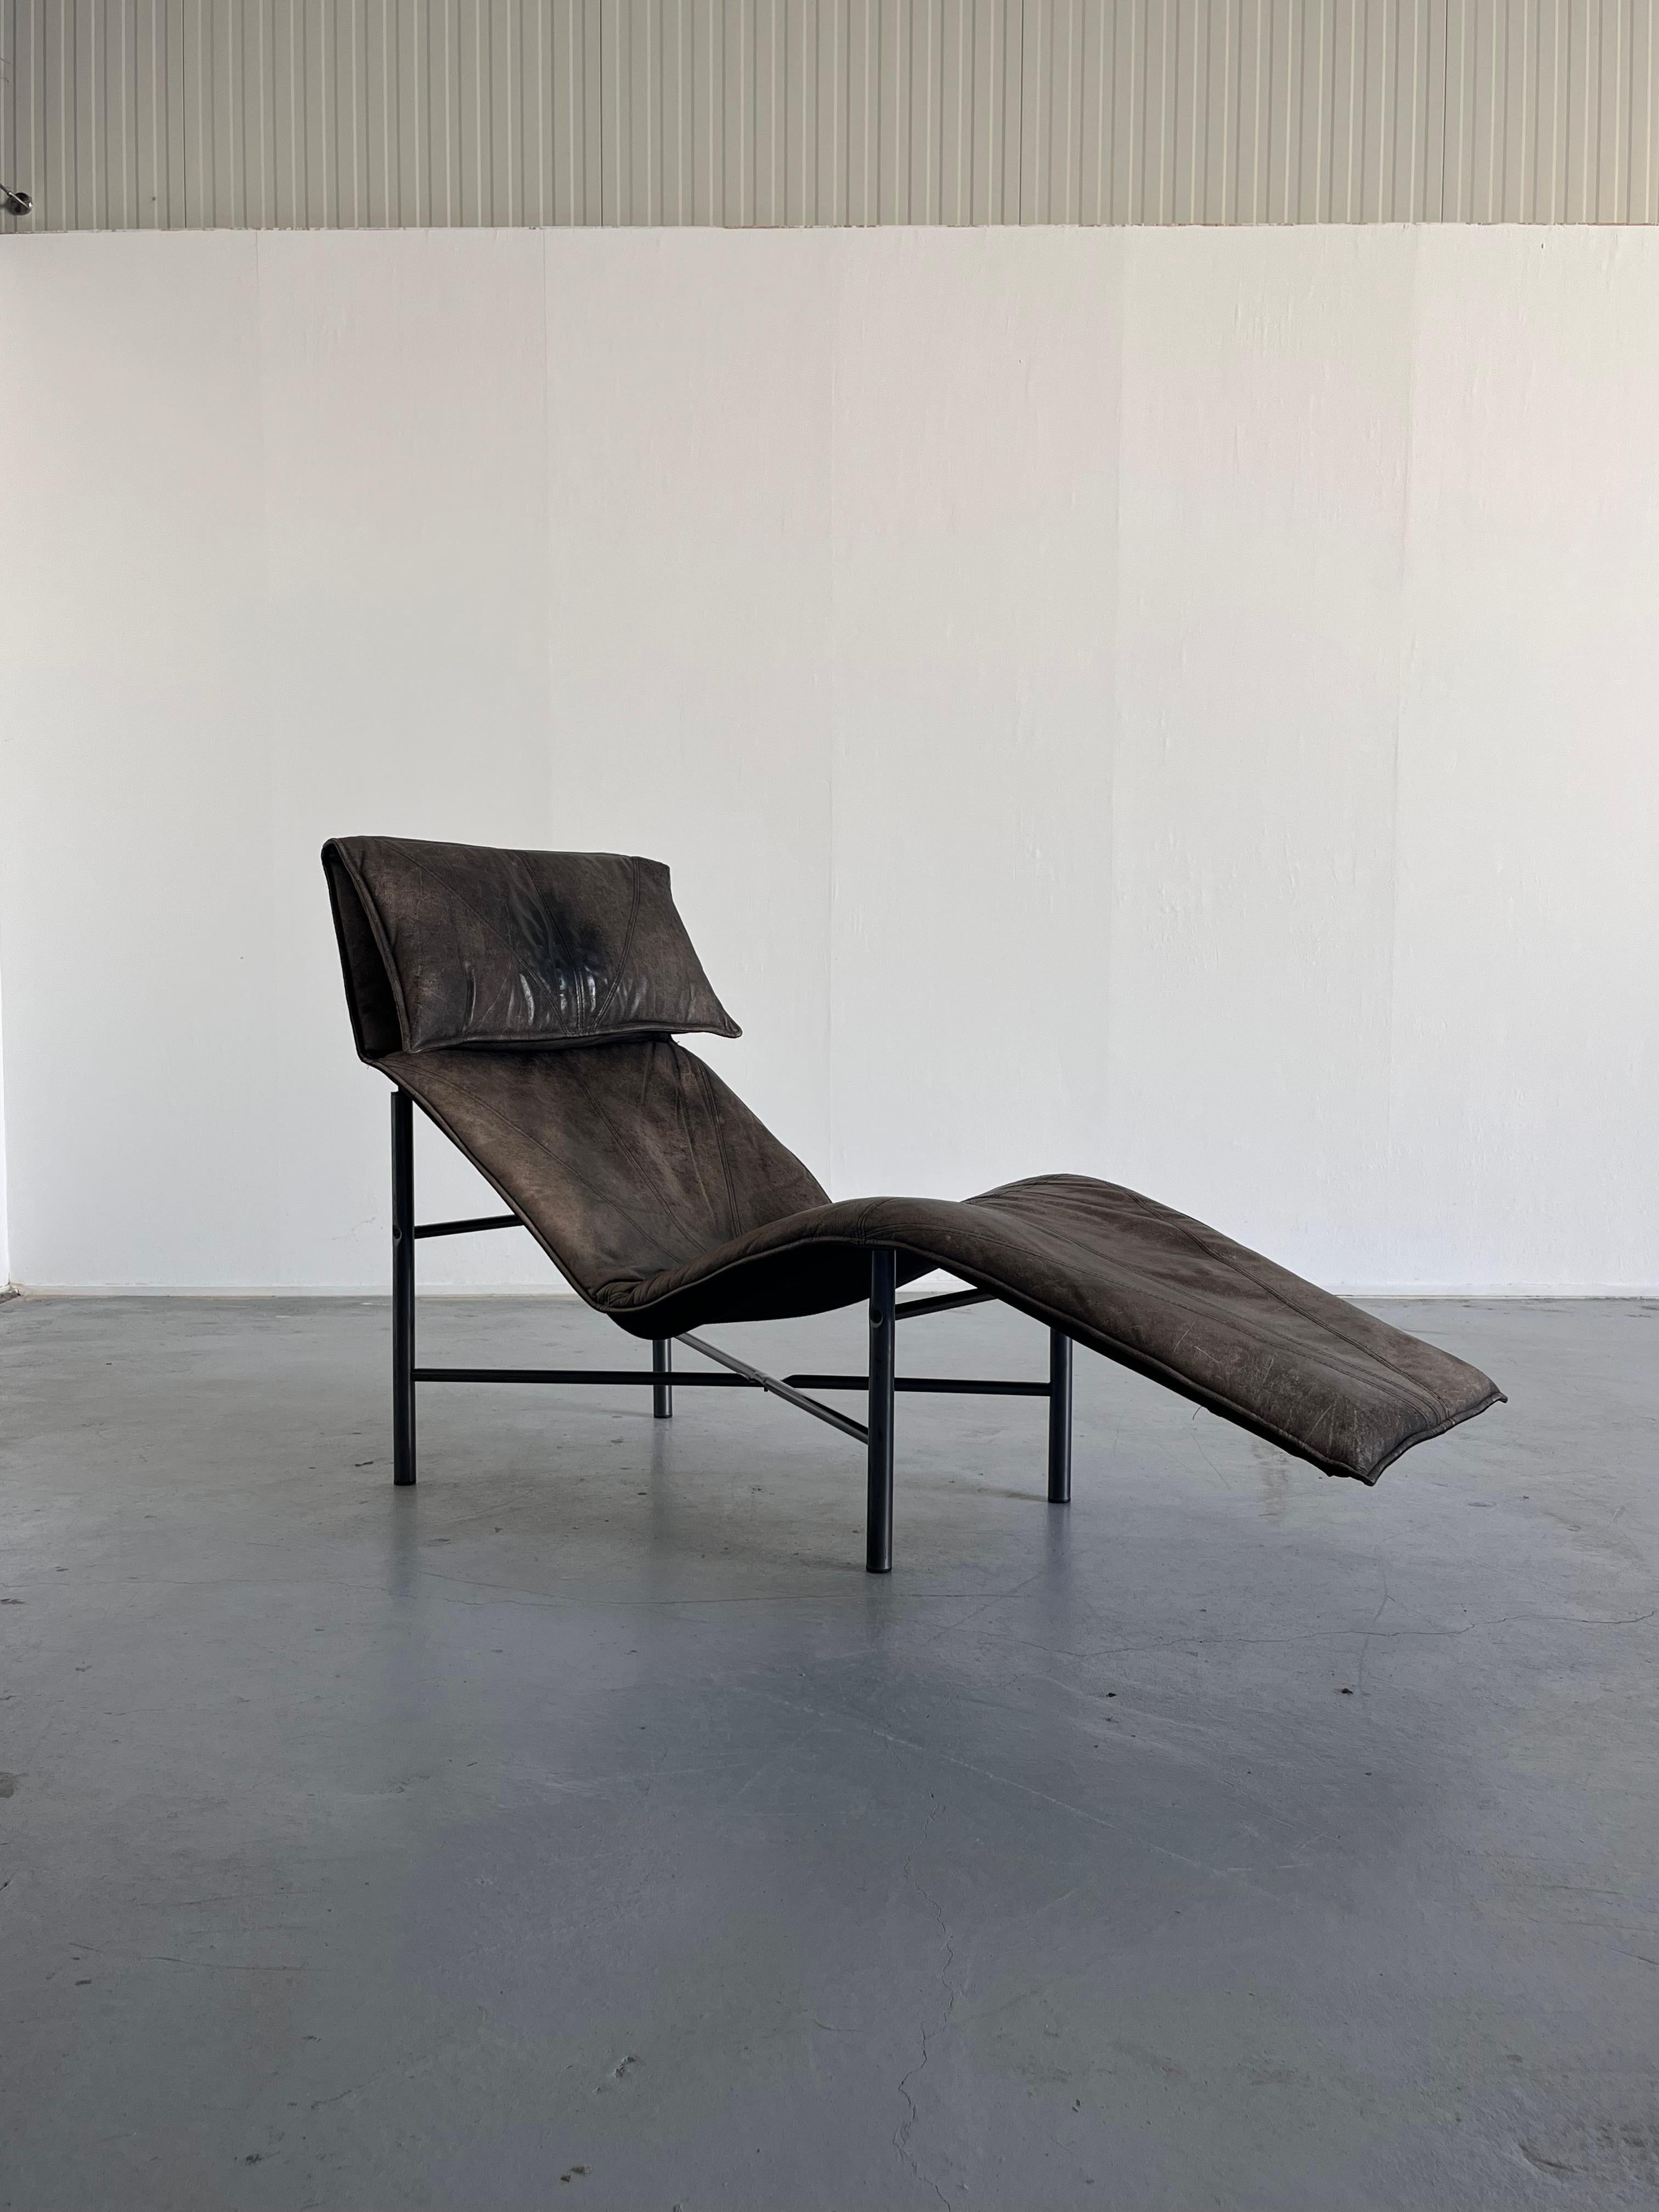 Late 20th Century Vintage Leather Chaise Longue by Tord Bjorklund for Ikea, Sweden, 1980s